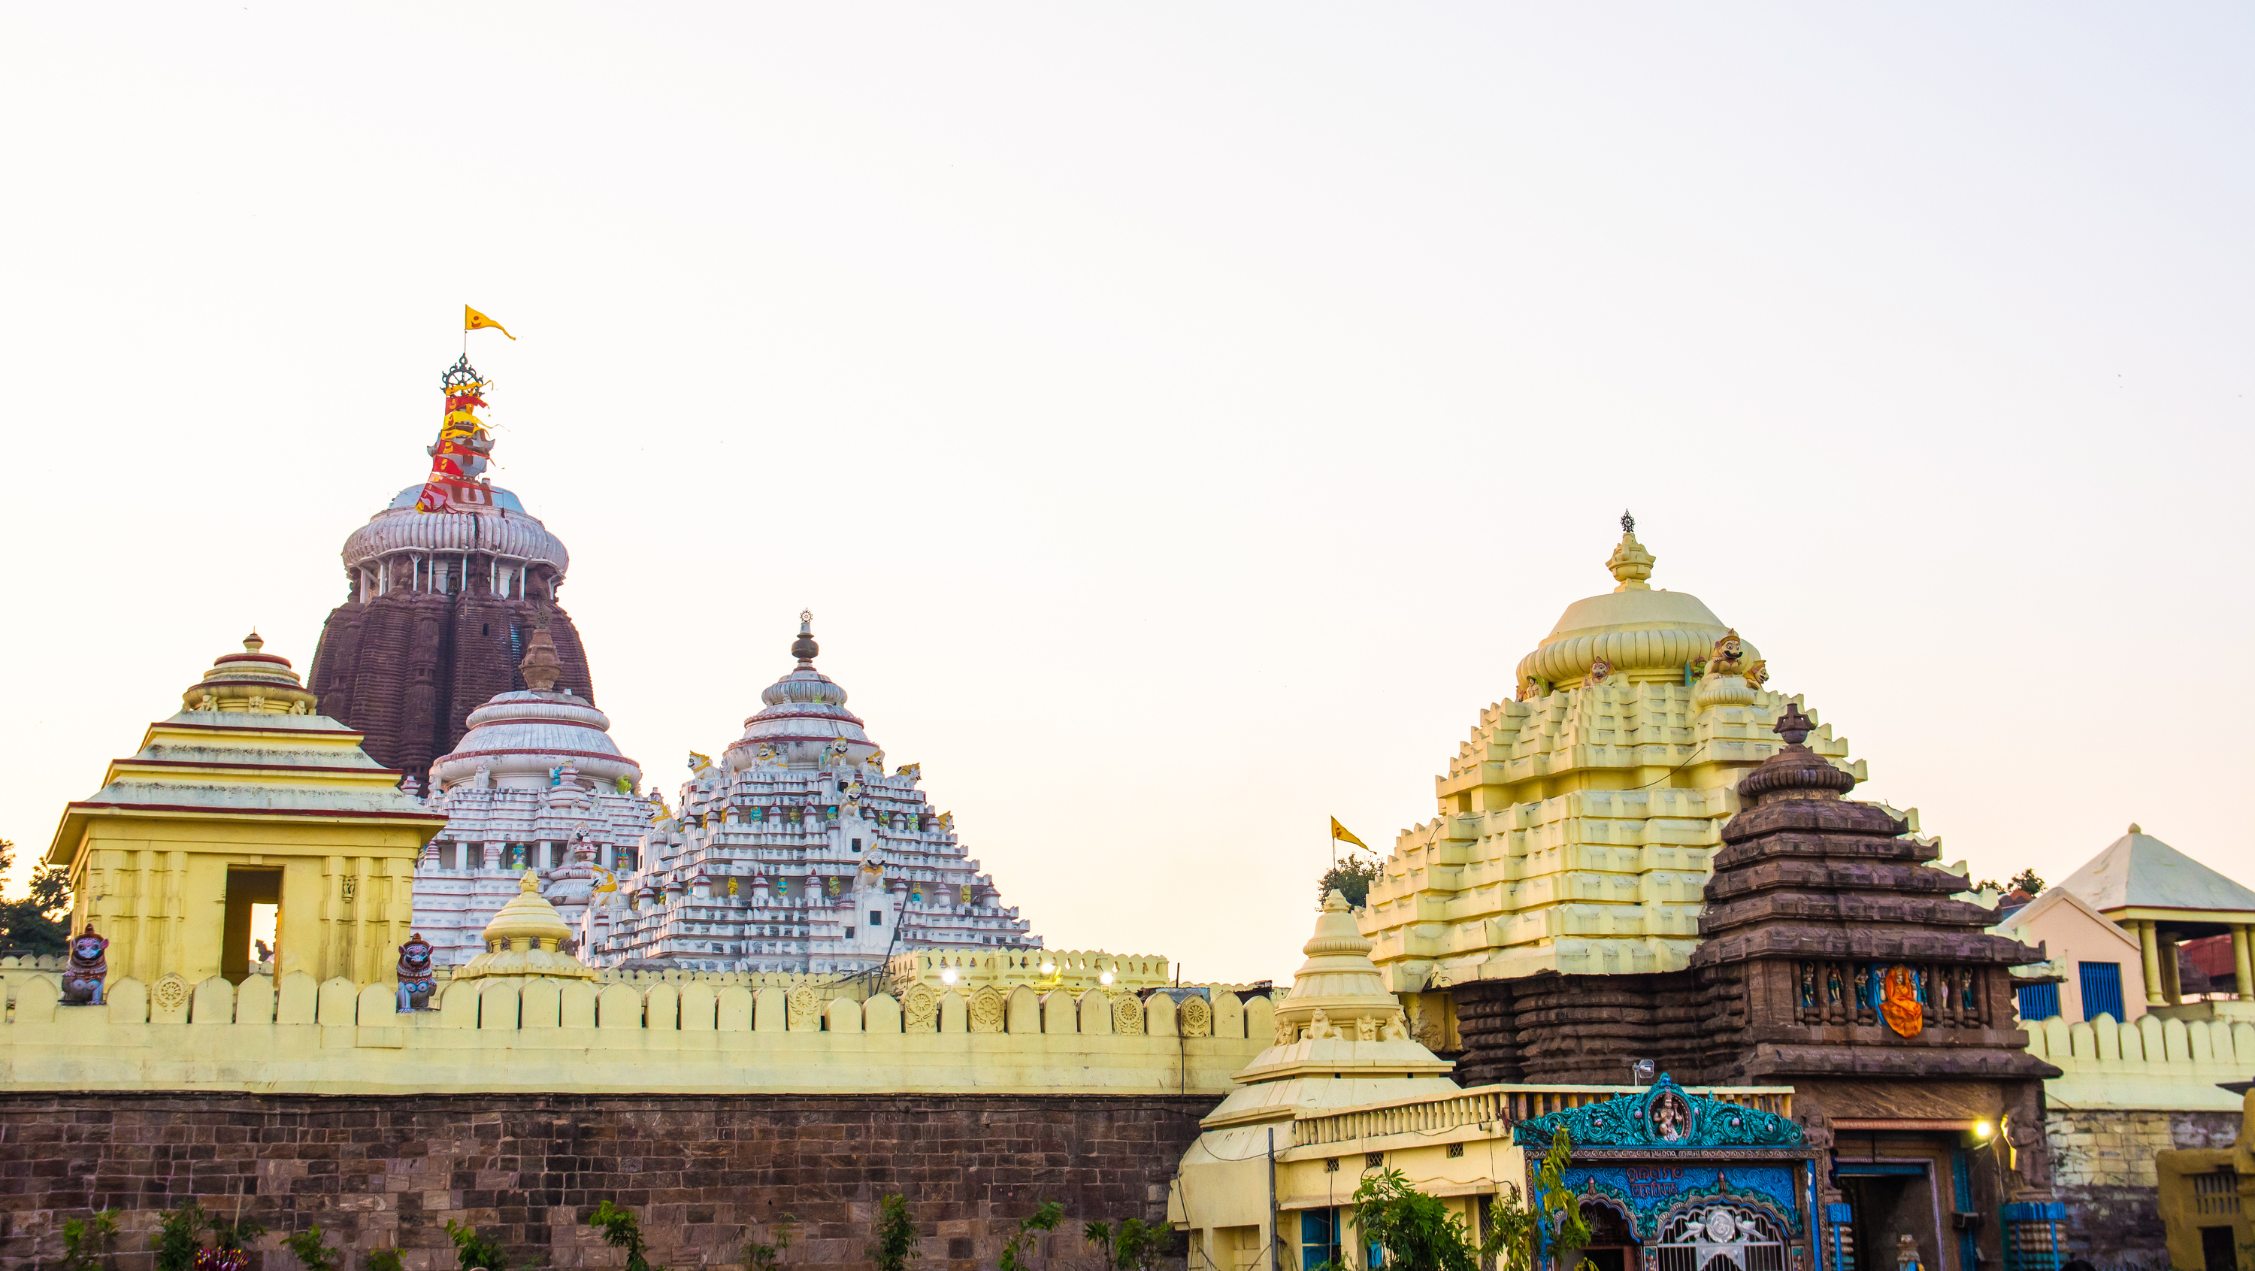 How to Reach Puri Jagannath Temple from Bangalore?